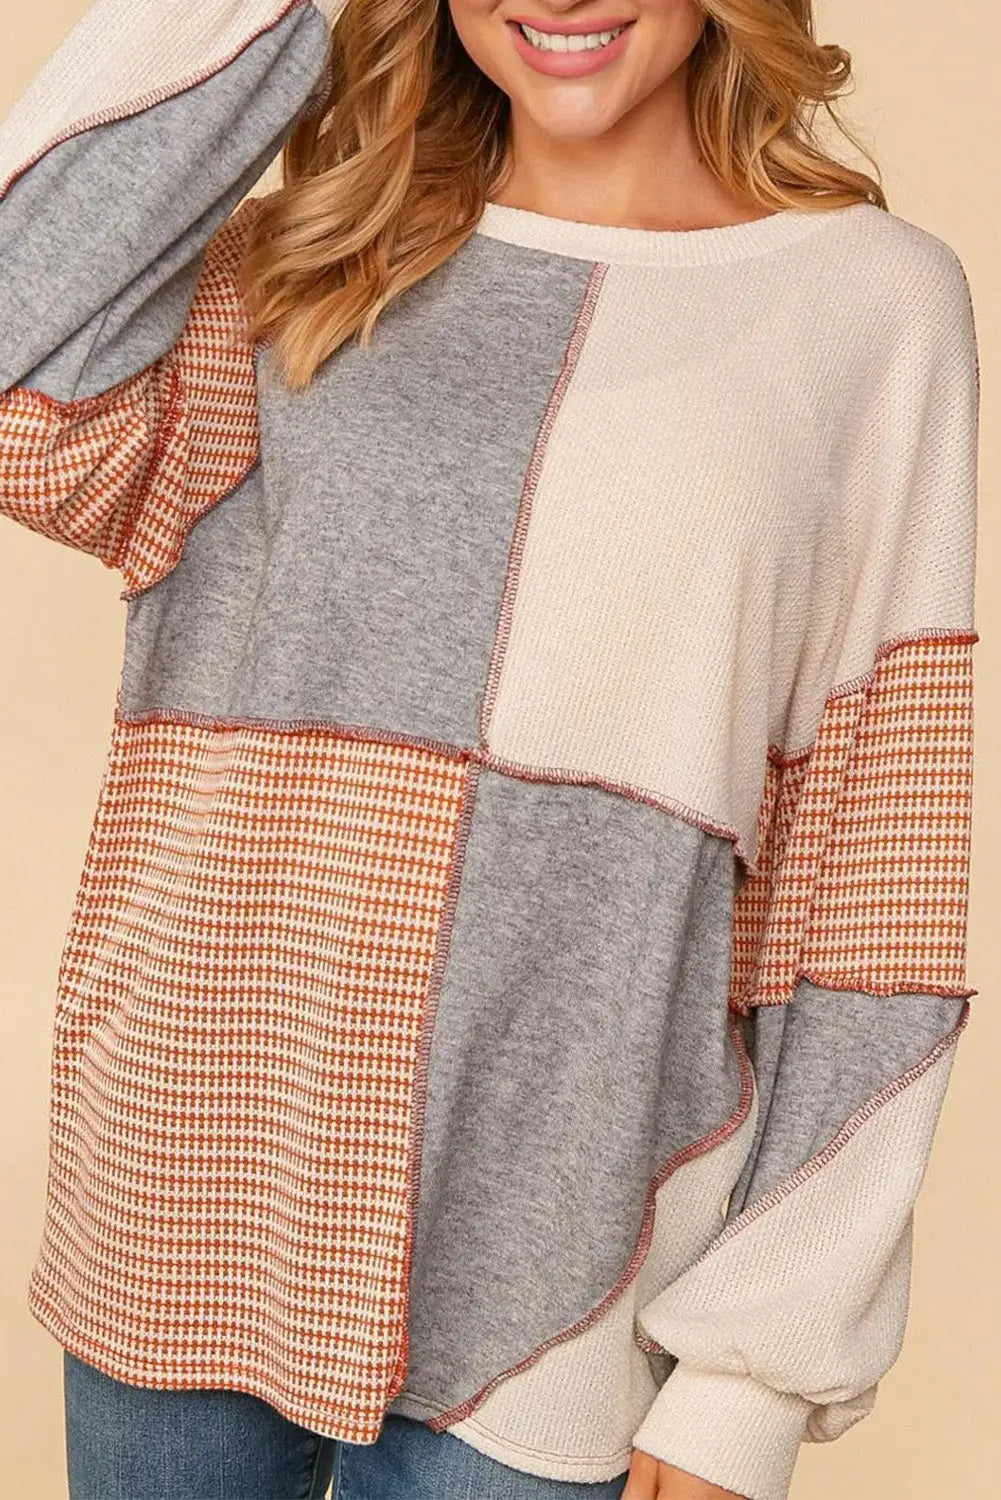 Red sandalwood exposed seam colorblock oversized knit top - multicolor / l / 85% polyester + 15% elastane - long sleeve